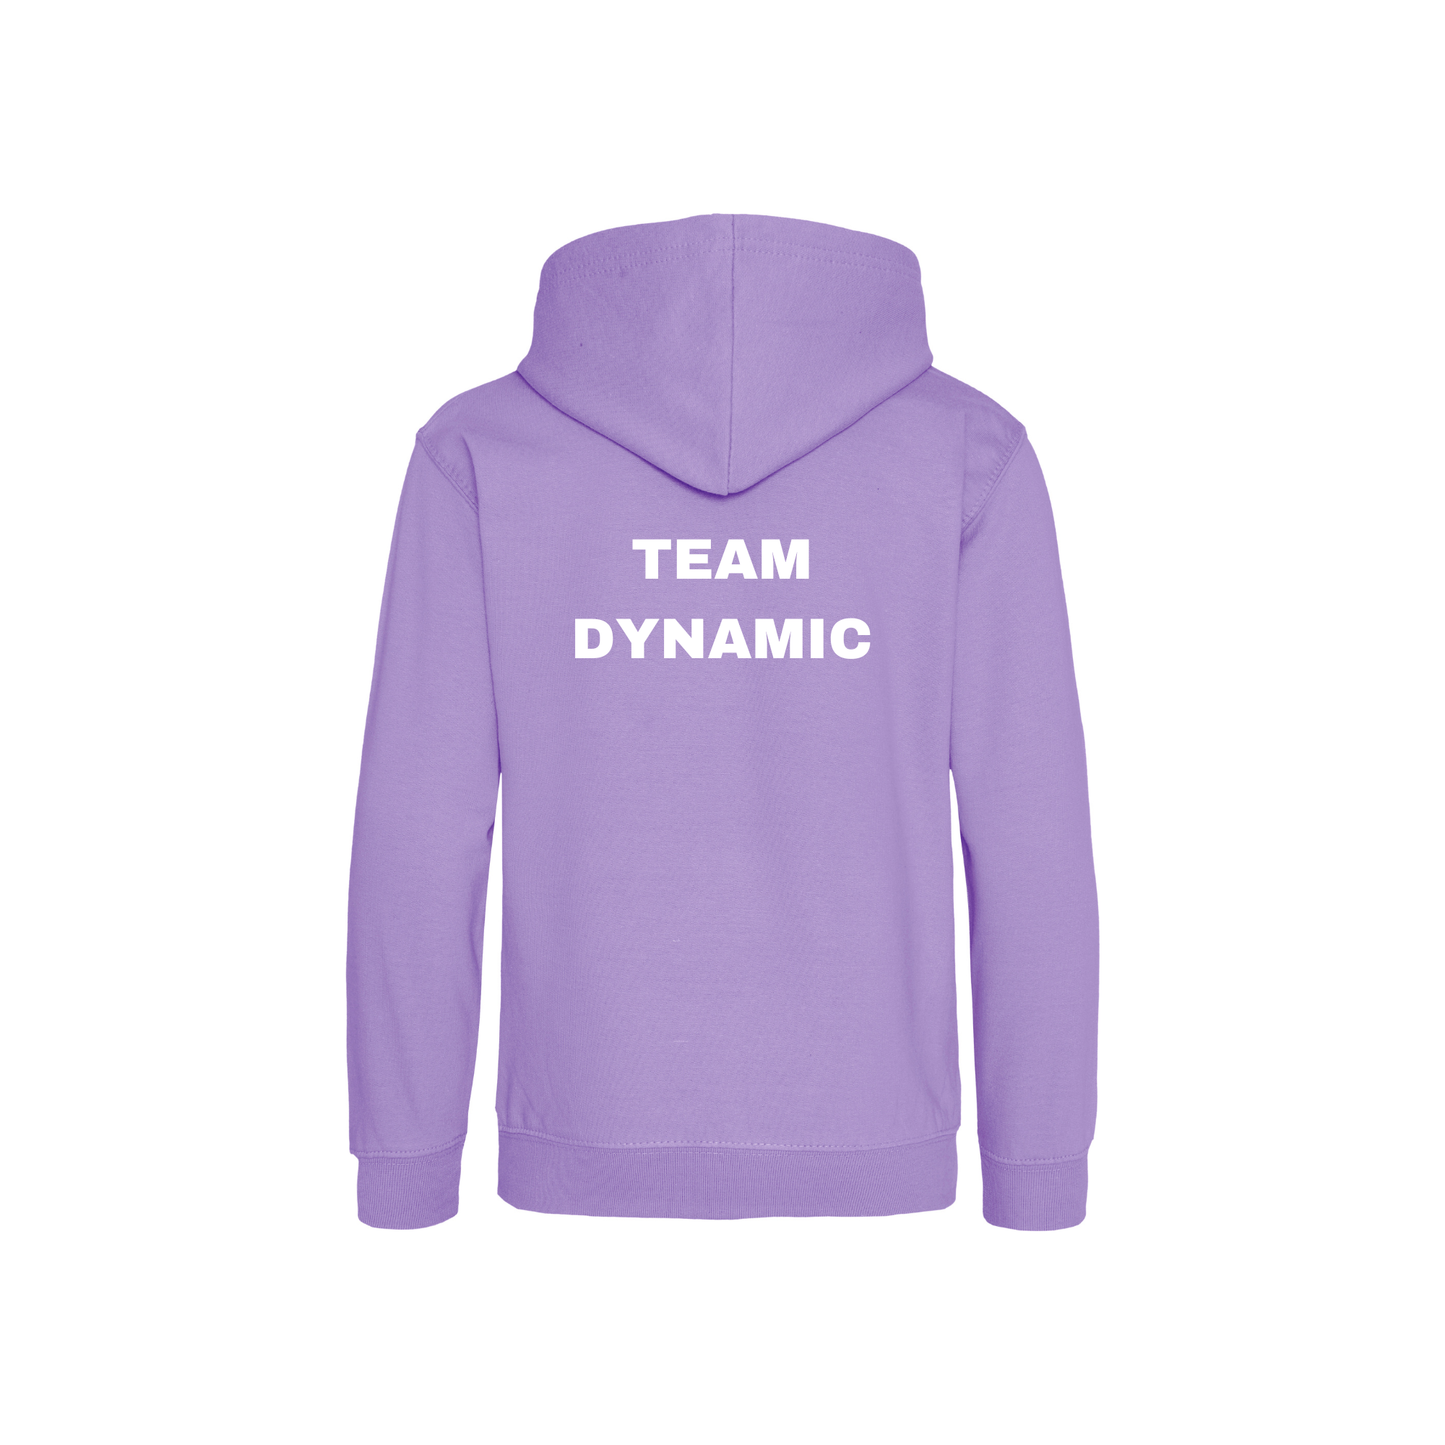 DGA - Digital Lavender Hoodie - Available from Age 3 to Adult XXL